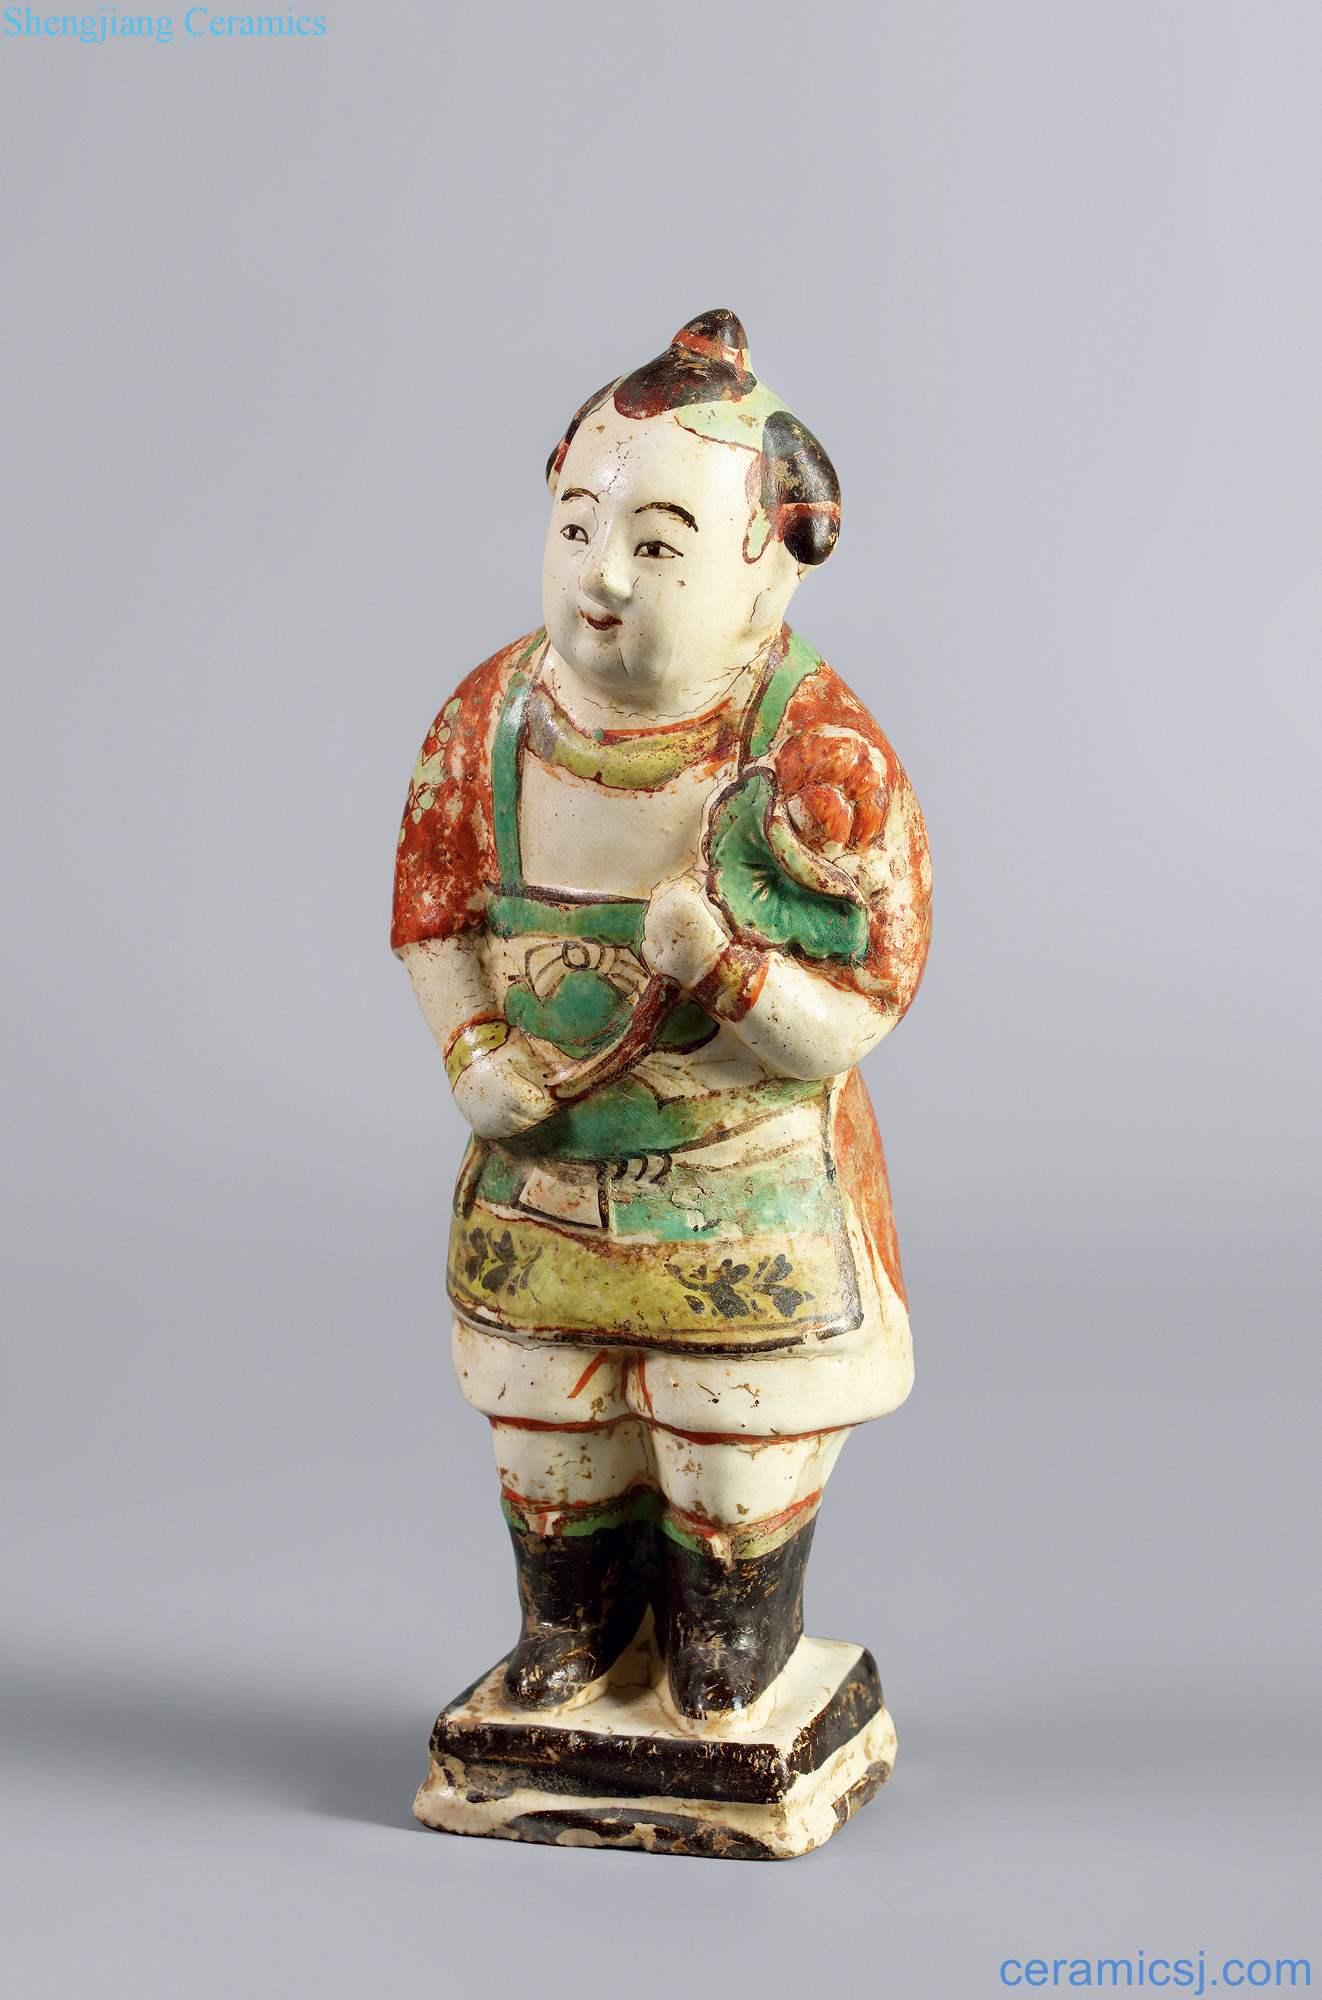 Northern song dynasty (960-1127) and gold (1115-1234) magnetic state kiln red and green color, the boy stands resemble